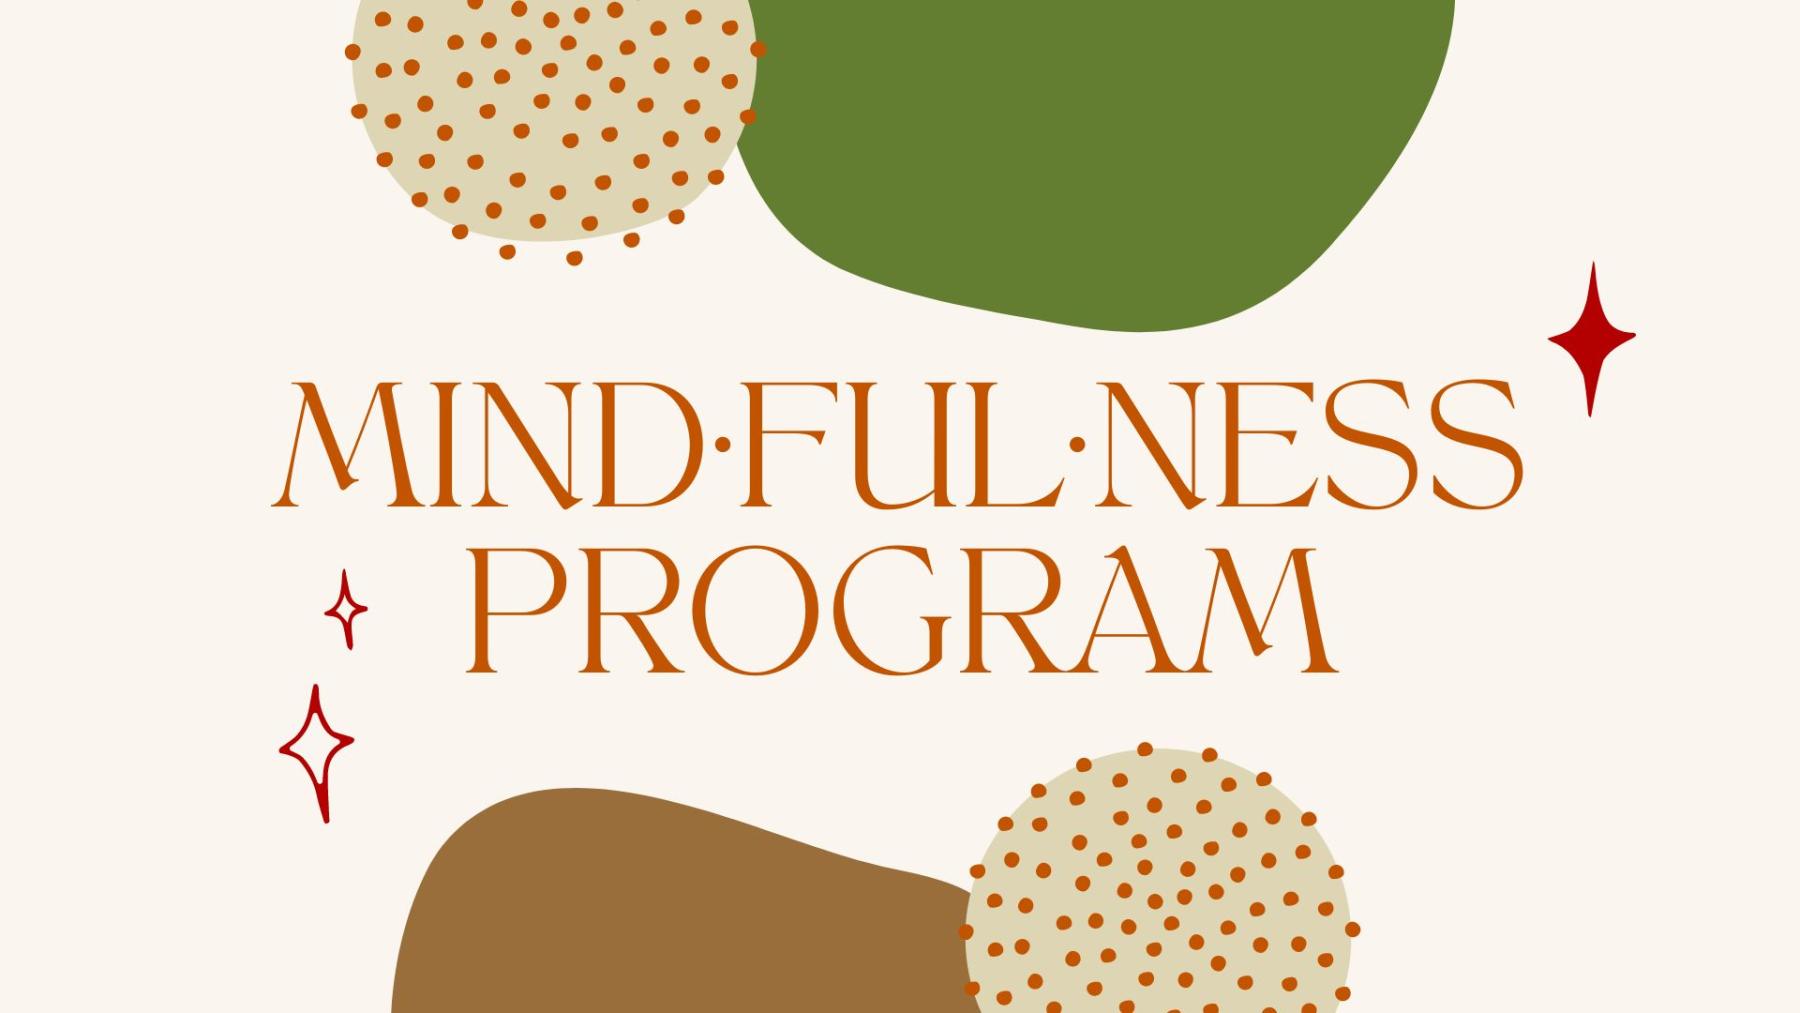 Mindfulness Program with green and brown circles